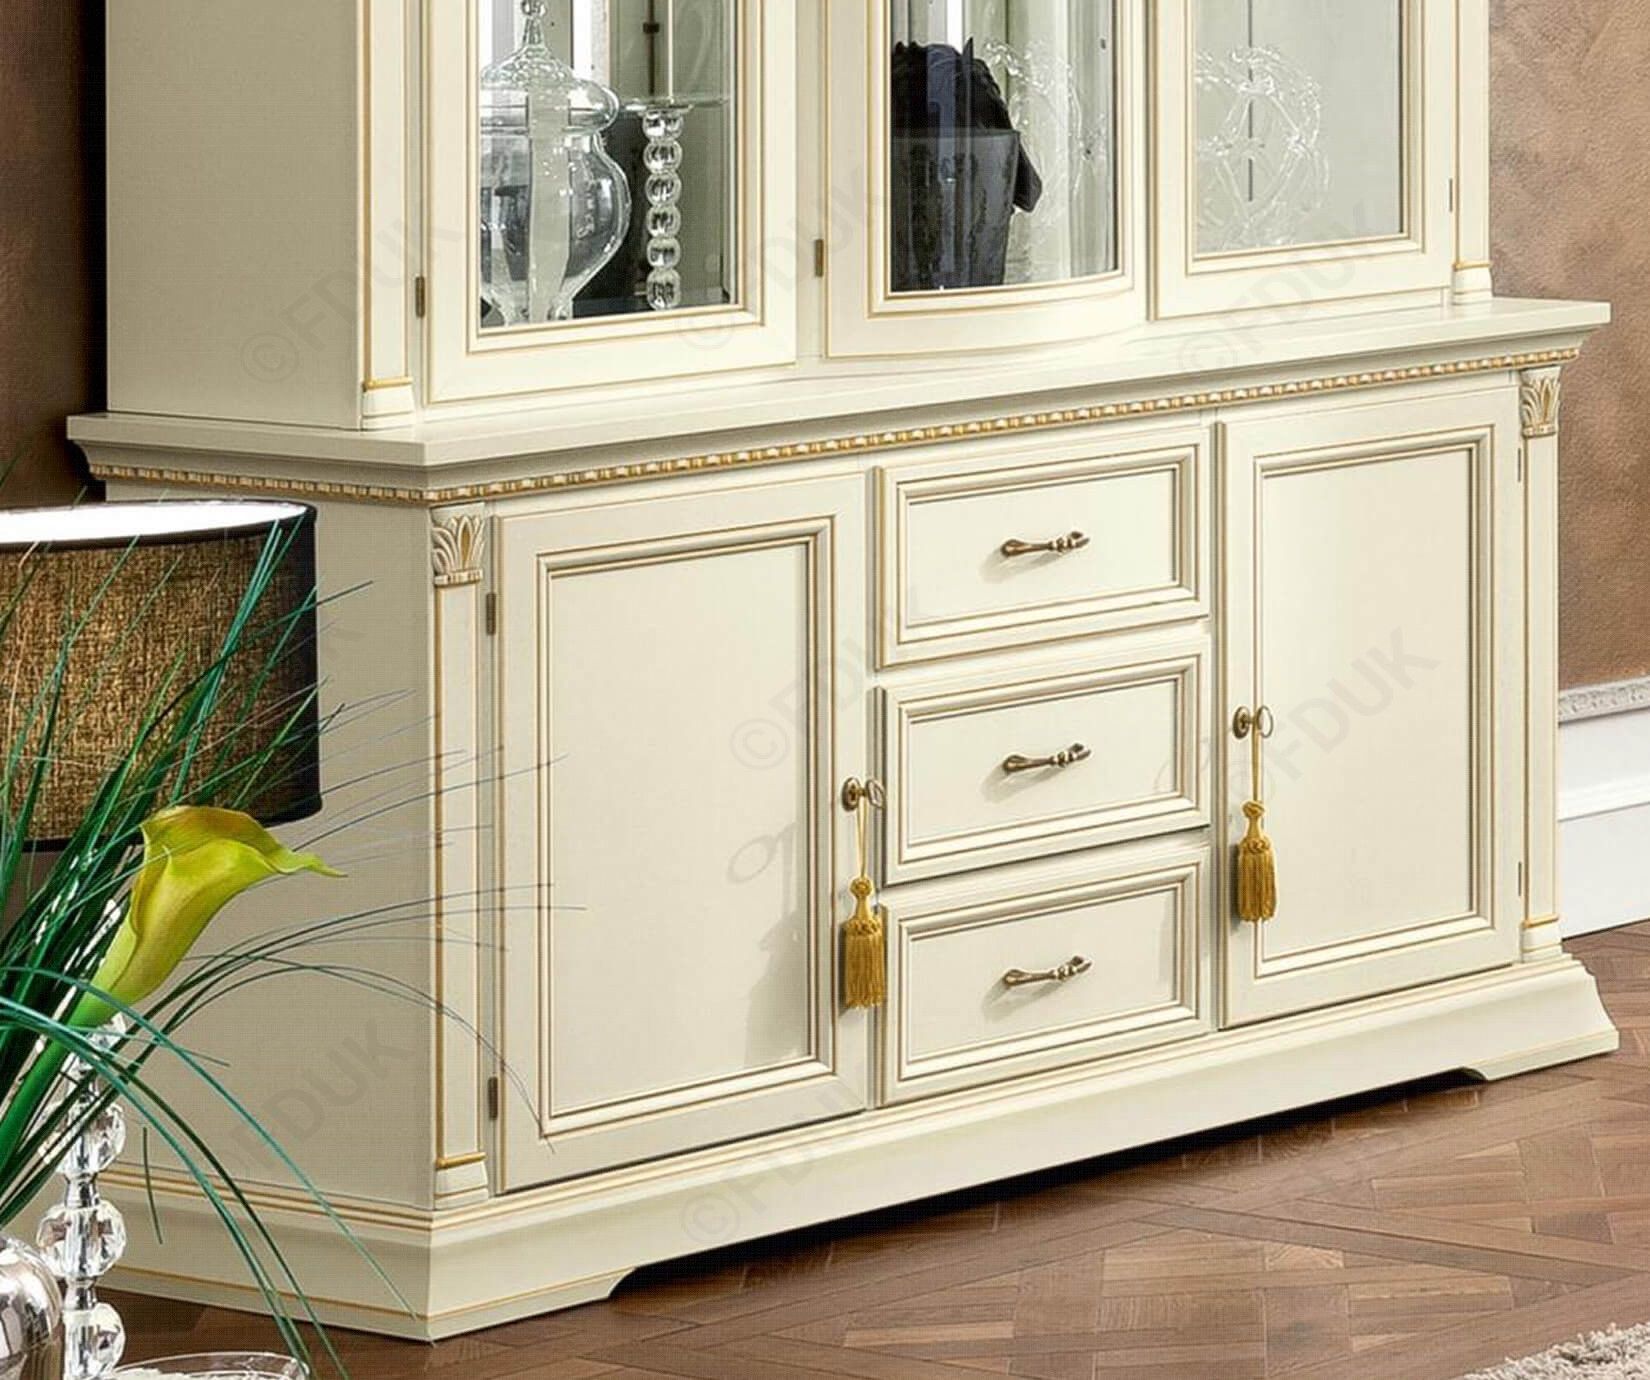 Camel Group Treviso White Ash Finish 2 Door 3 Drawer Buffet In 2 Door 3 Drawer Buffets (View 20 of 30)